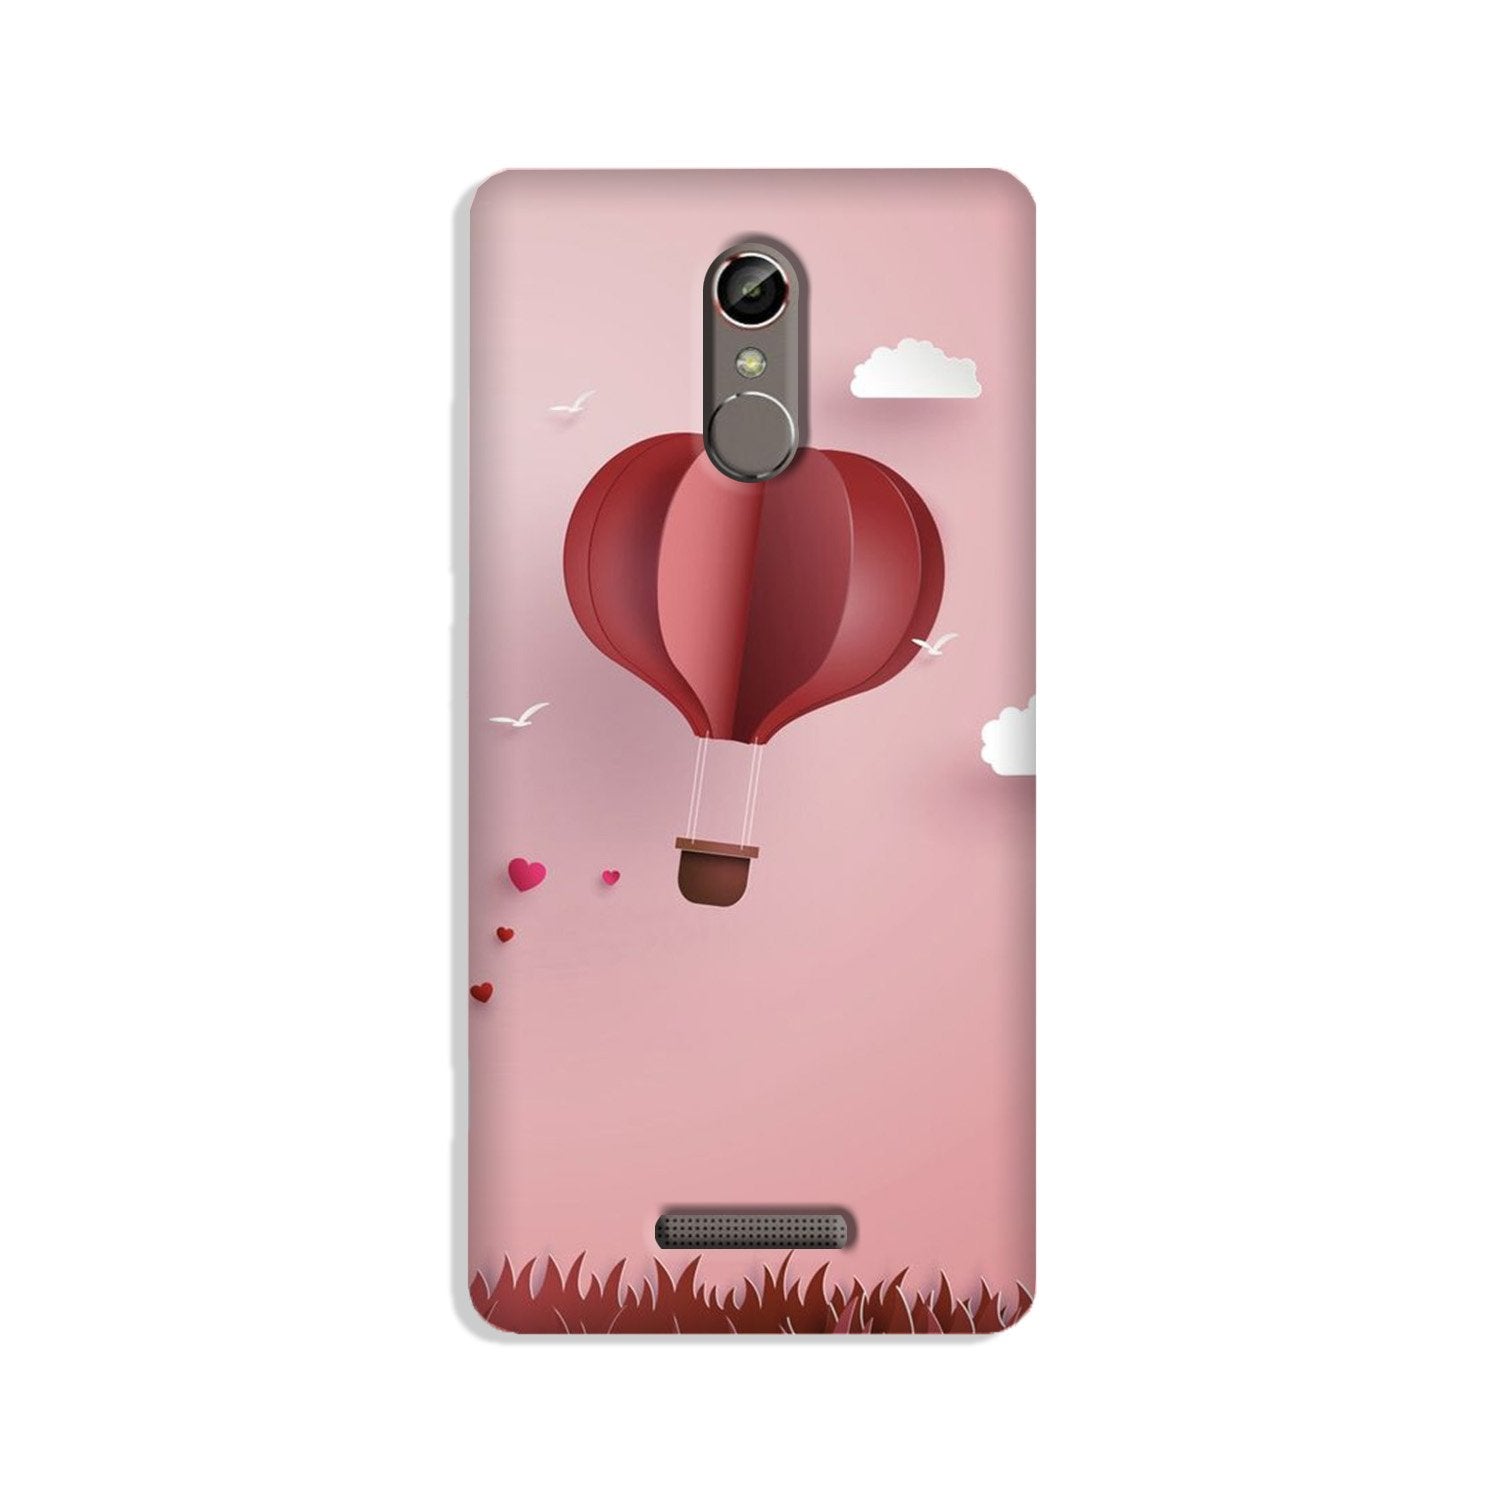 Parachute Case for Gionee S6s (Design No. 286)